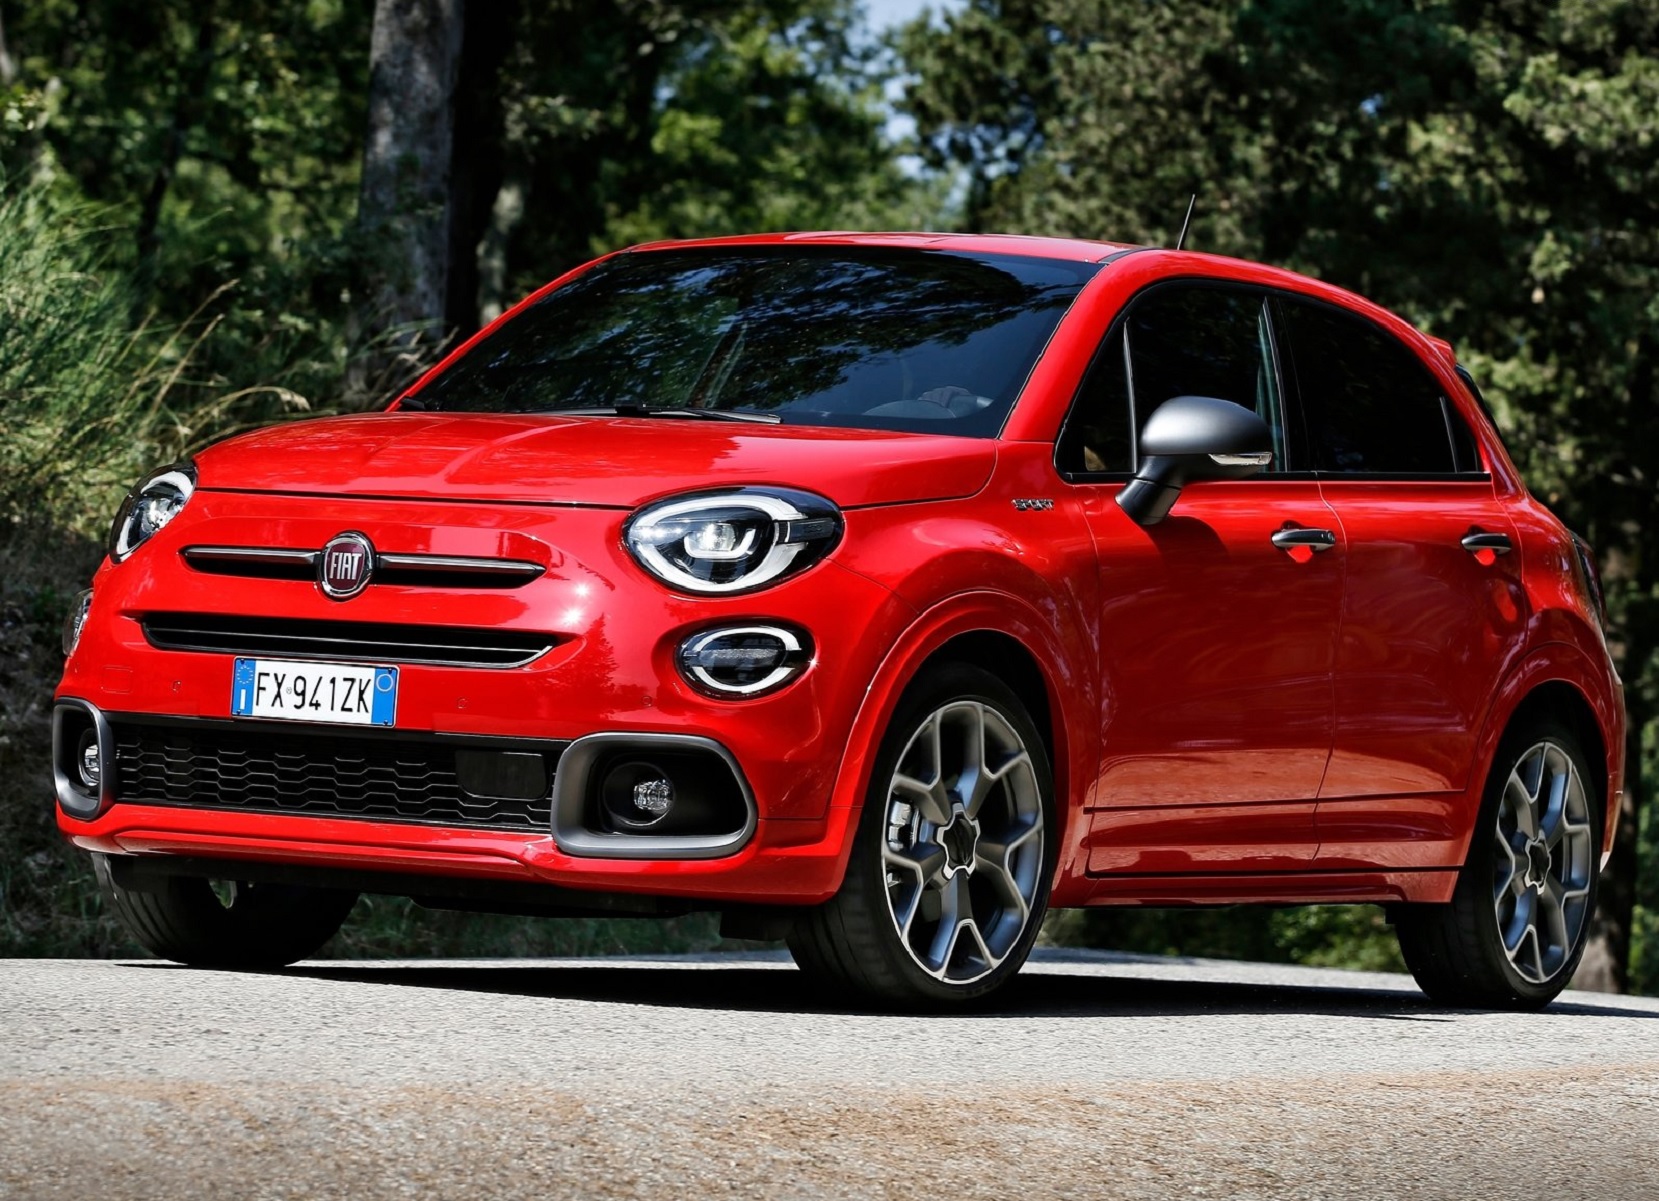 Why is the 2020 Fiat 500X One of Consumer Reports' Worst SUVs?